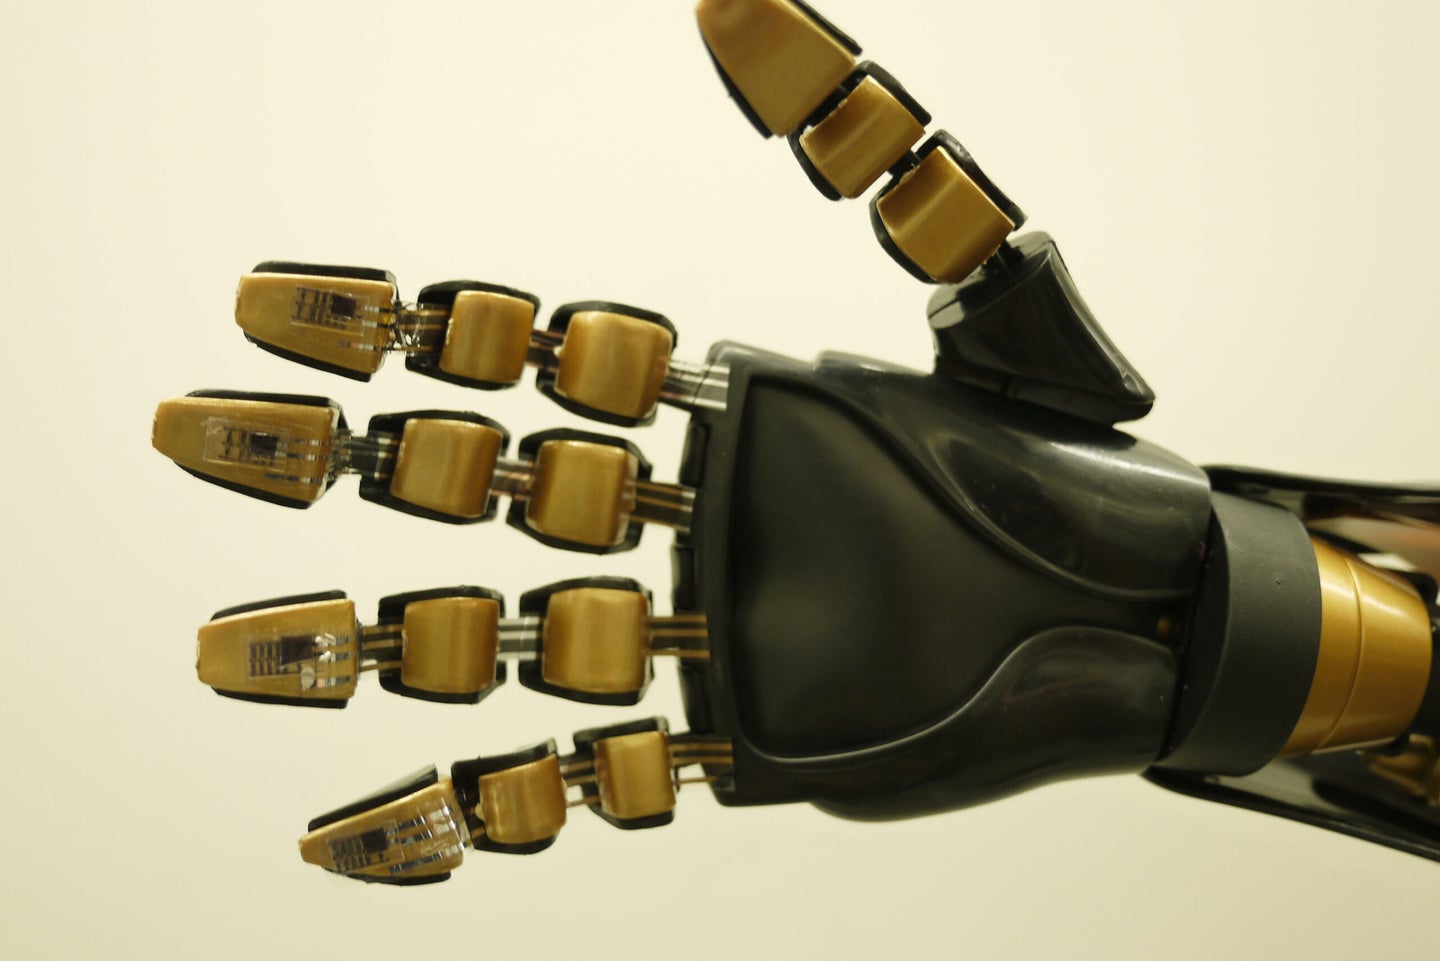 Prosthetic Limbs Could Have Artificial Skin That Really Feels